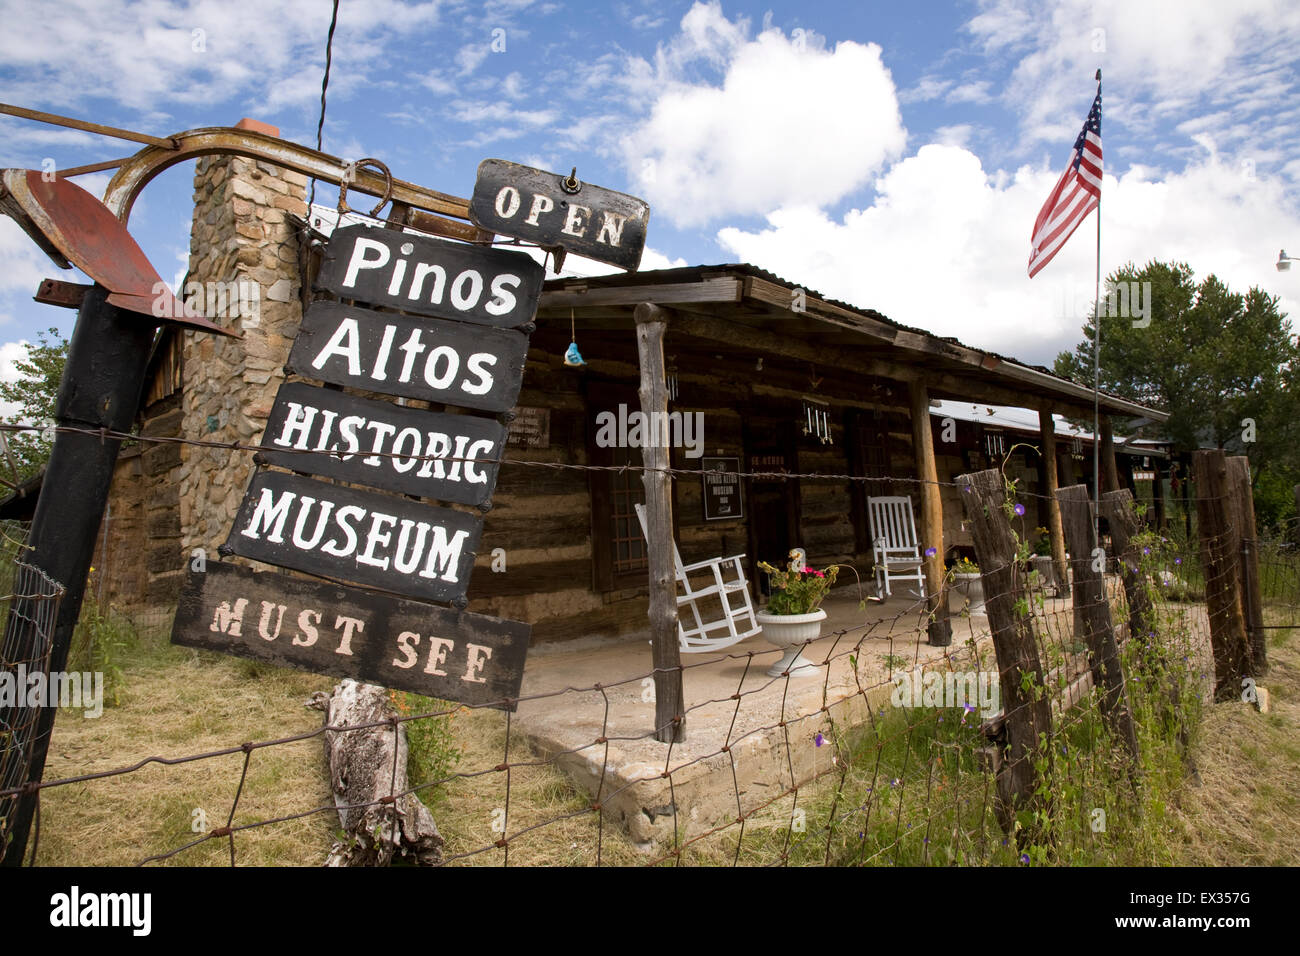 The Pinos Altos Historic Museum revealed some good nuggets of info about this old gold mining town. Stock Photo